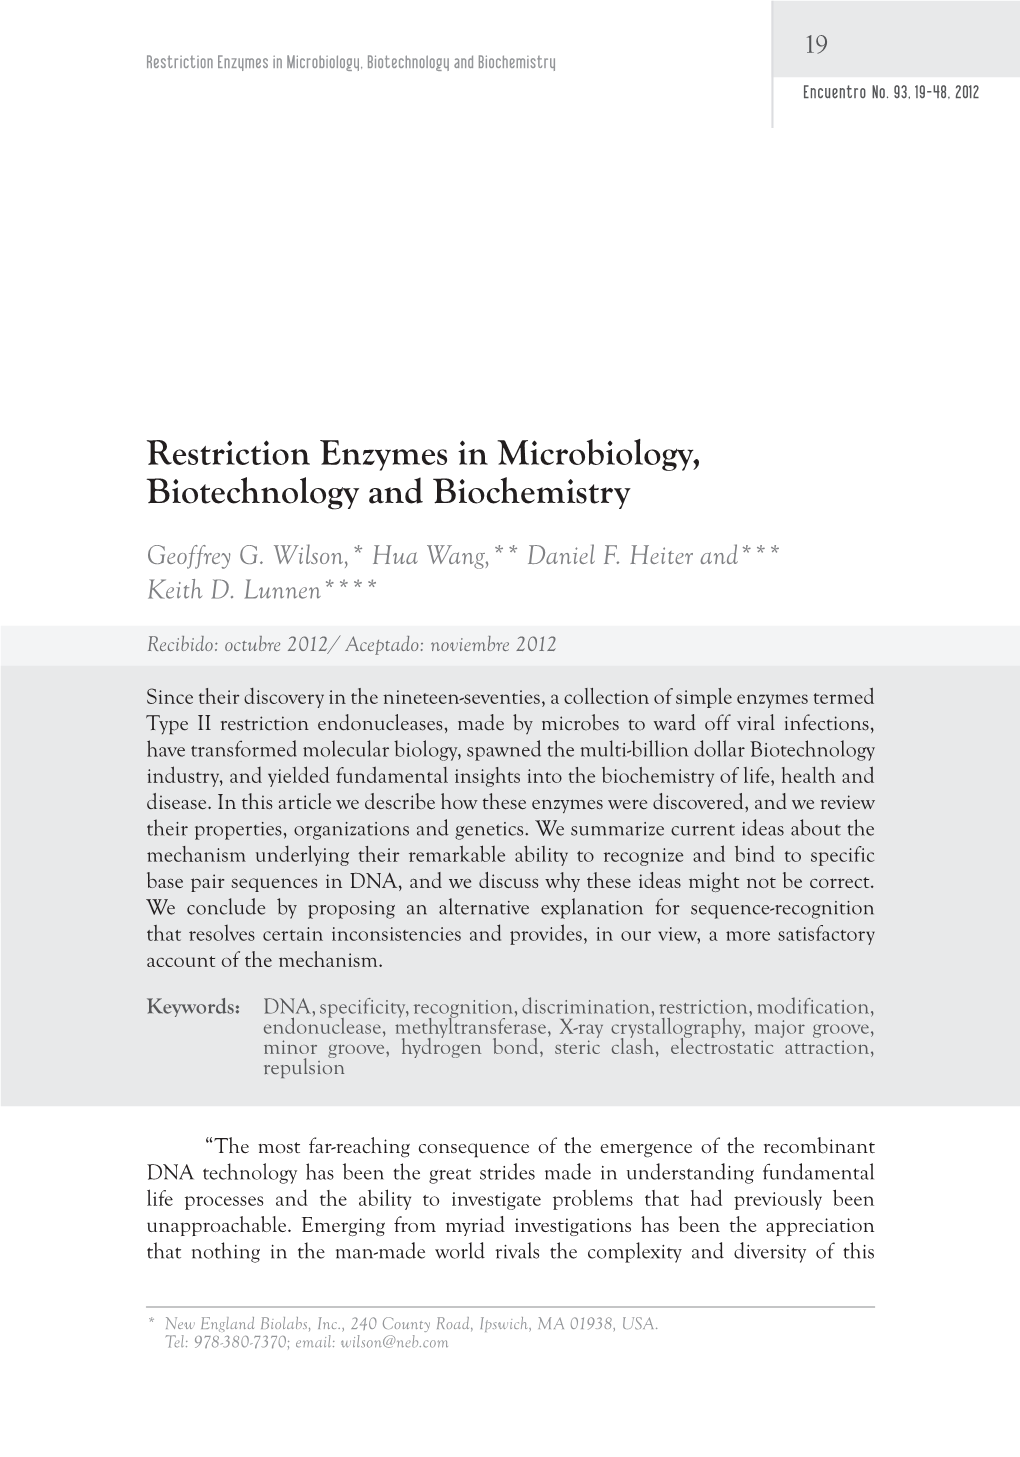 Restriction Enzymes in Microbiology, Biotechnology and Biochemistry Encuentro No